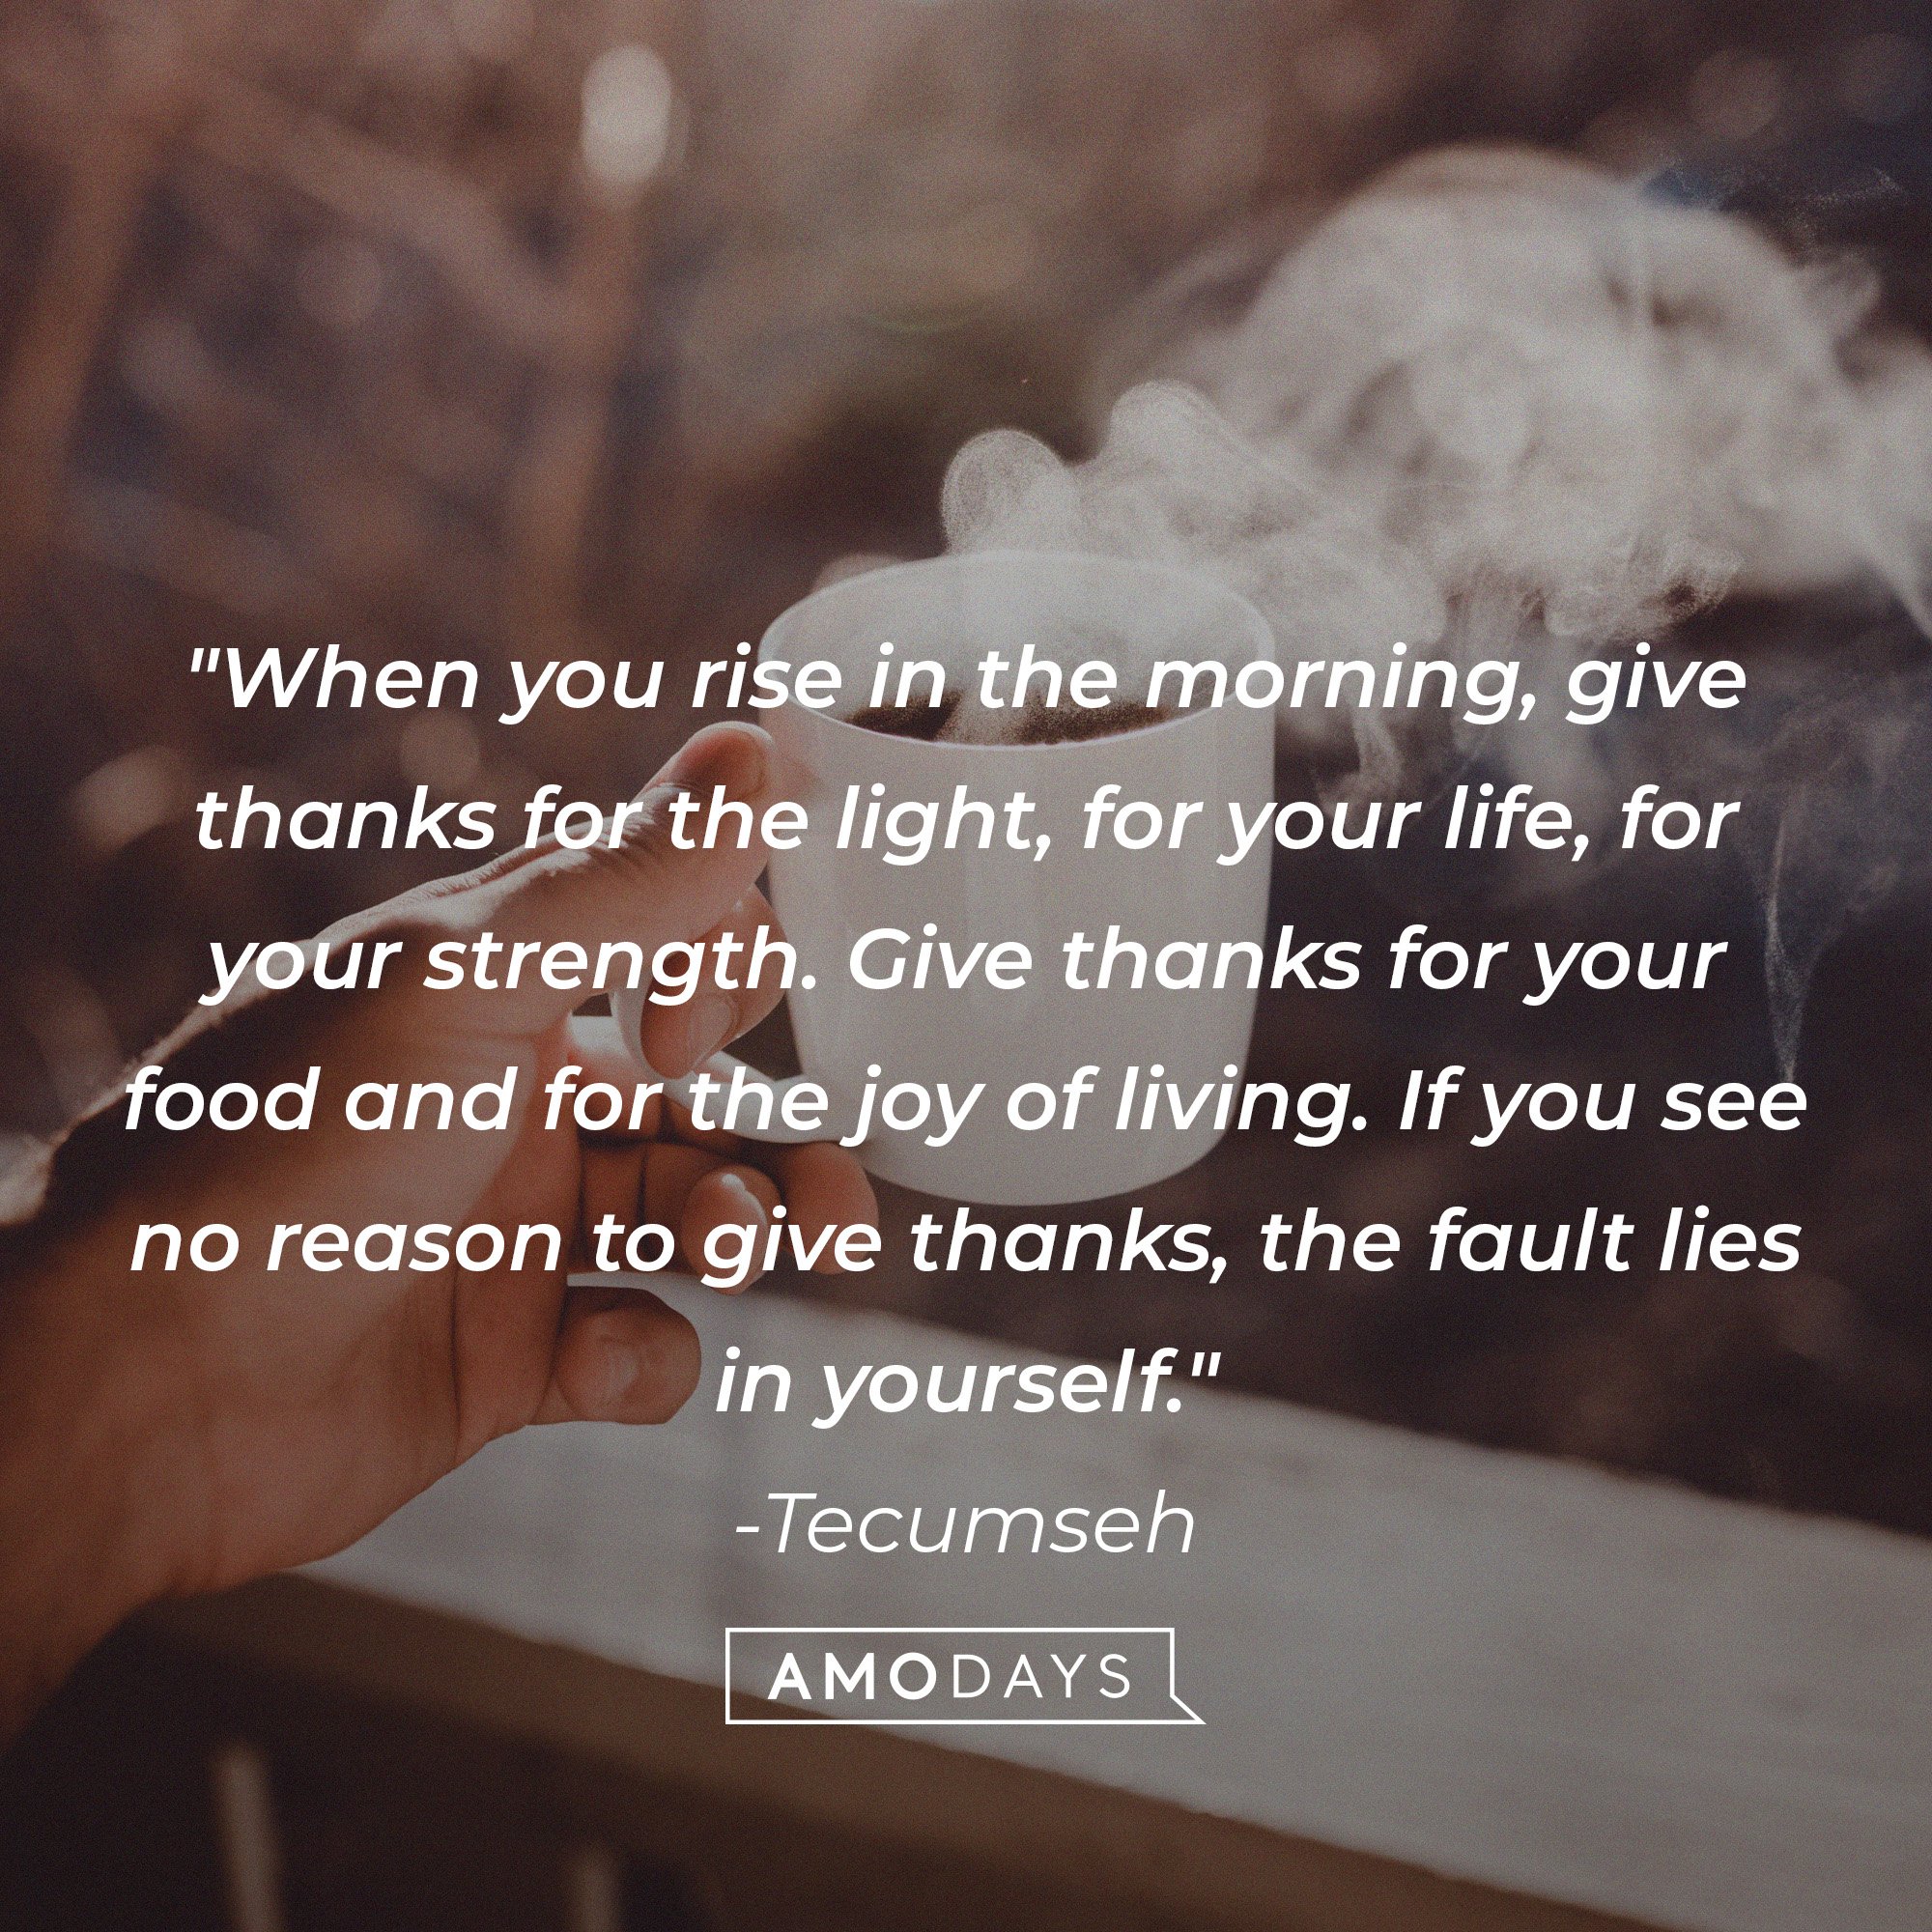 Tecumseh's quote: "When you rise in the morning, give thanks for the light, for your life, for your strength. Give thanks for your food and for the joy of living. If you see no reason to give thanks, the fault lies in yourself." | Image: AmoDays 